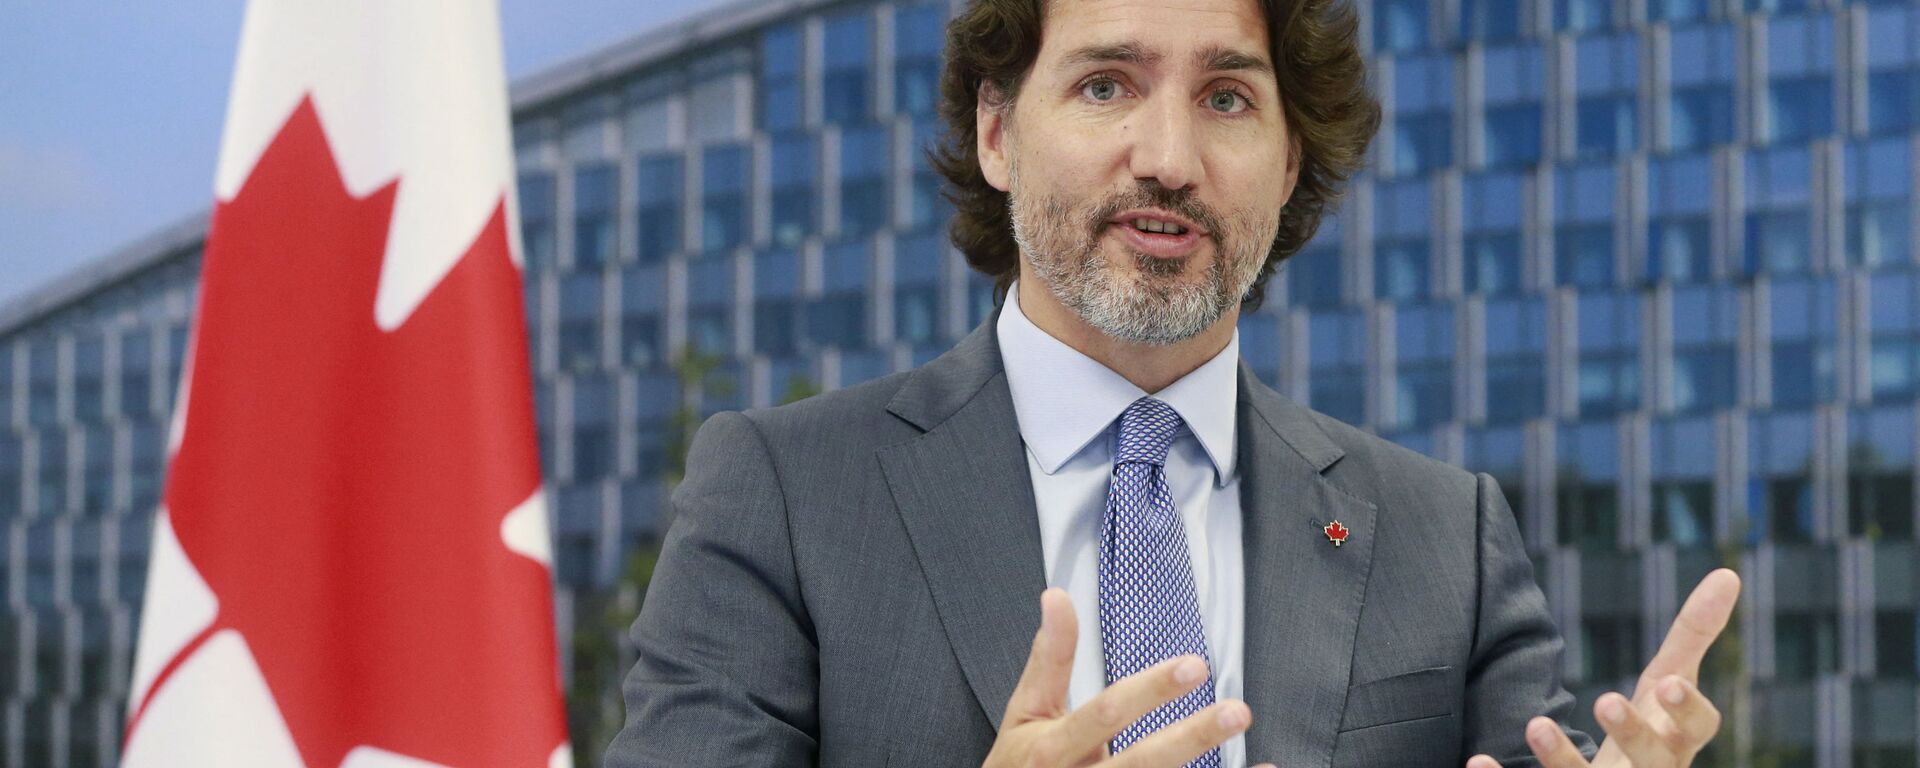 Canada's Prime Minister Justin Trudeau  speaks to the NATO Secretary General during a NATO summit at the North Atlantic Treaty Organization (NATO) headquarters in Brussels on June 14, 2021.  - Sputnik International, 1920